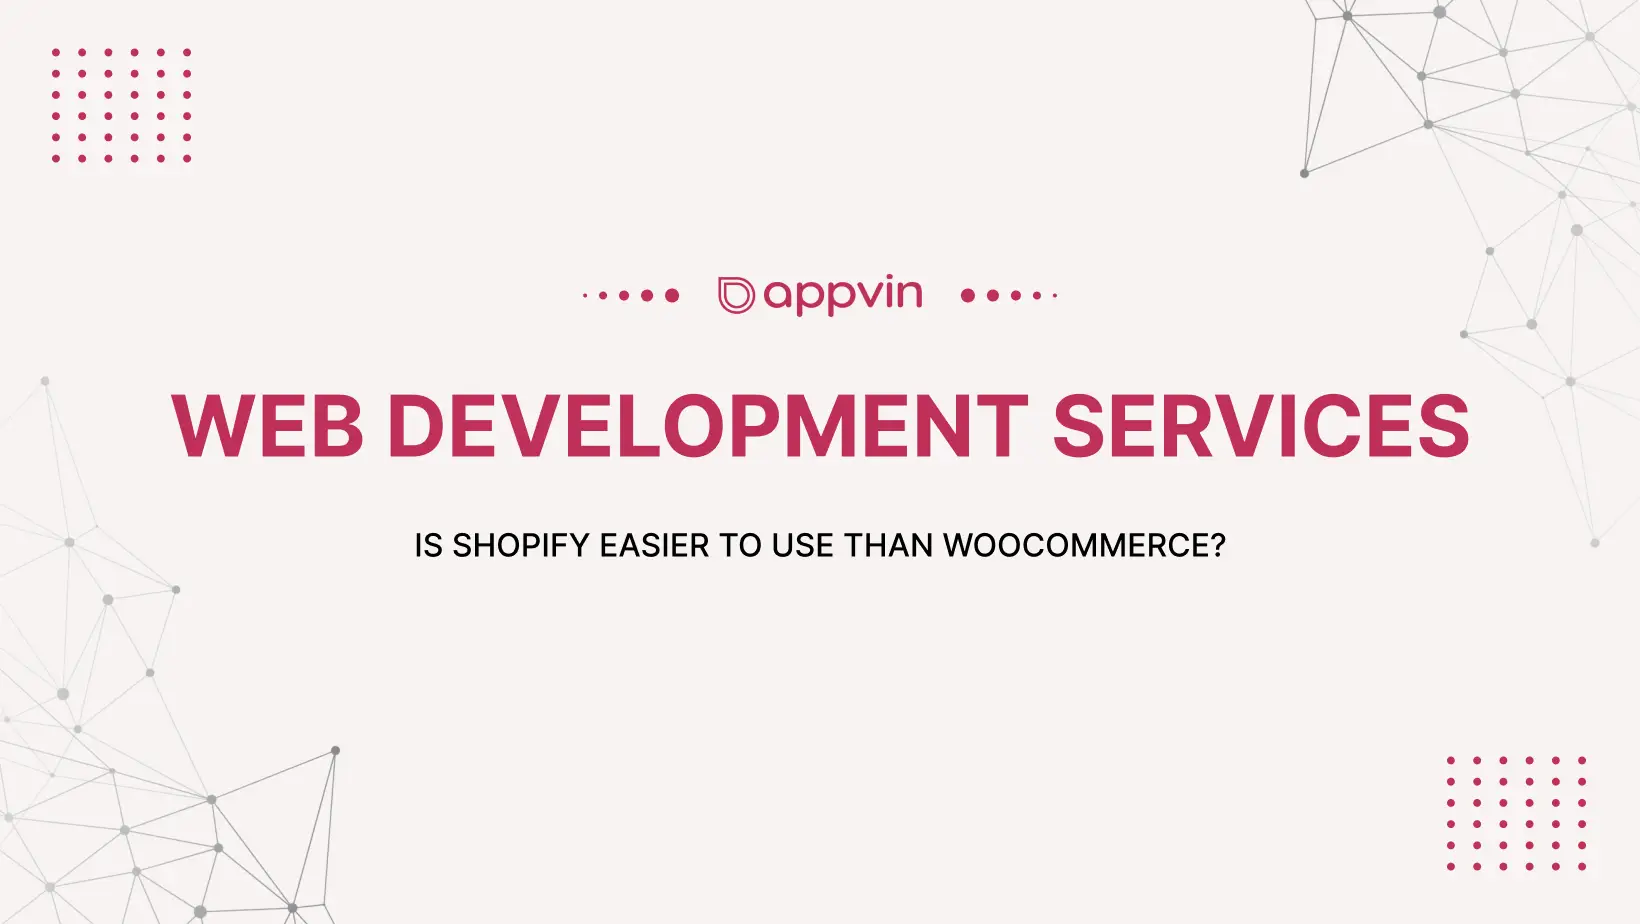 Is Shopify Easier to Use Than Woocommerce?